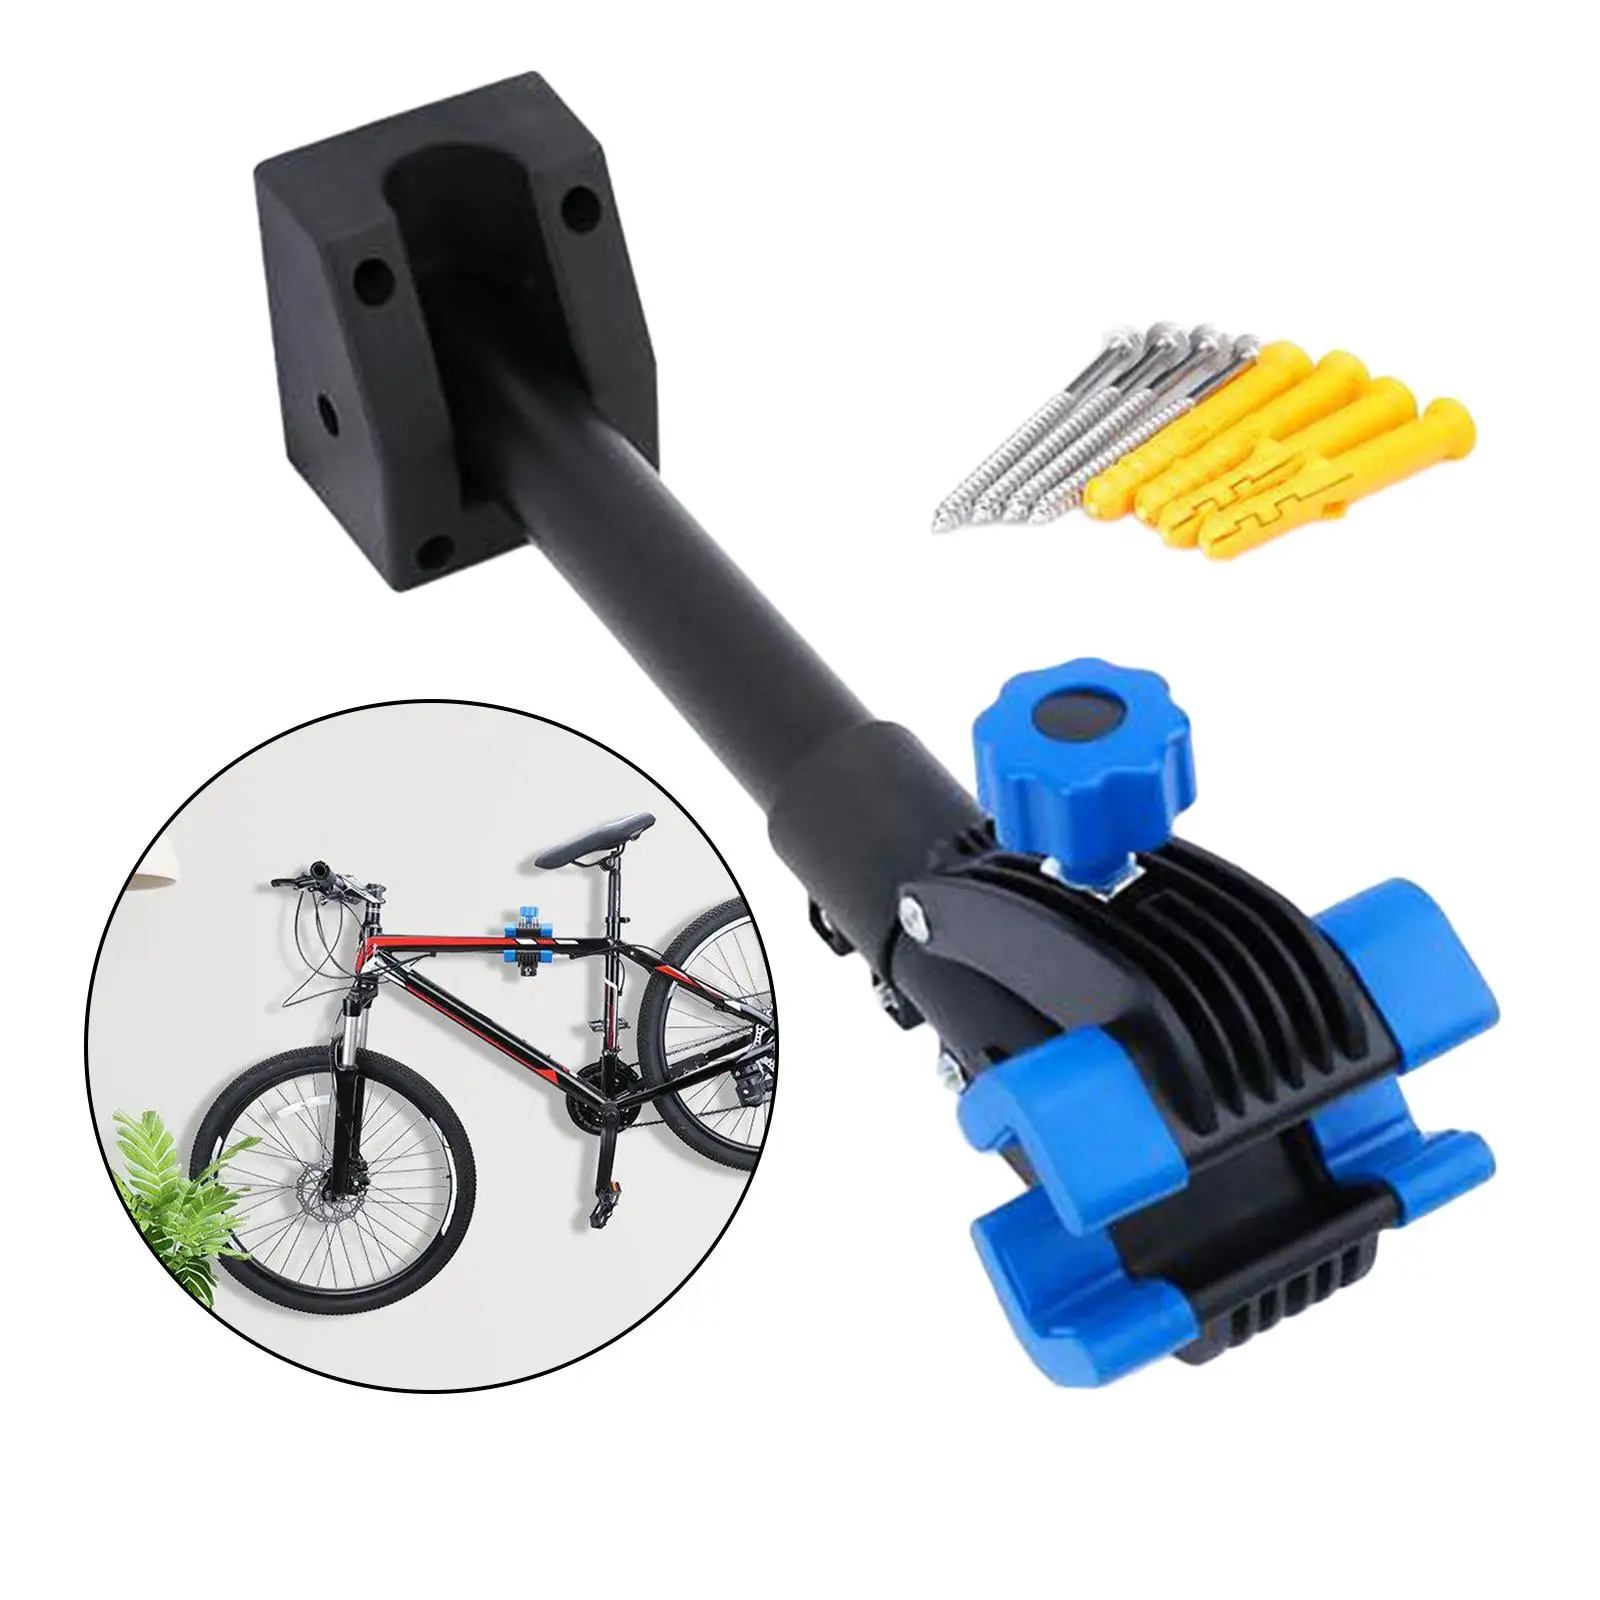 Folding Mount Foldable Bicycle Stand Clamp Hanger Mechanic Repair Tool